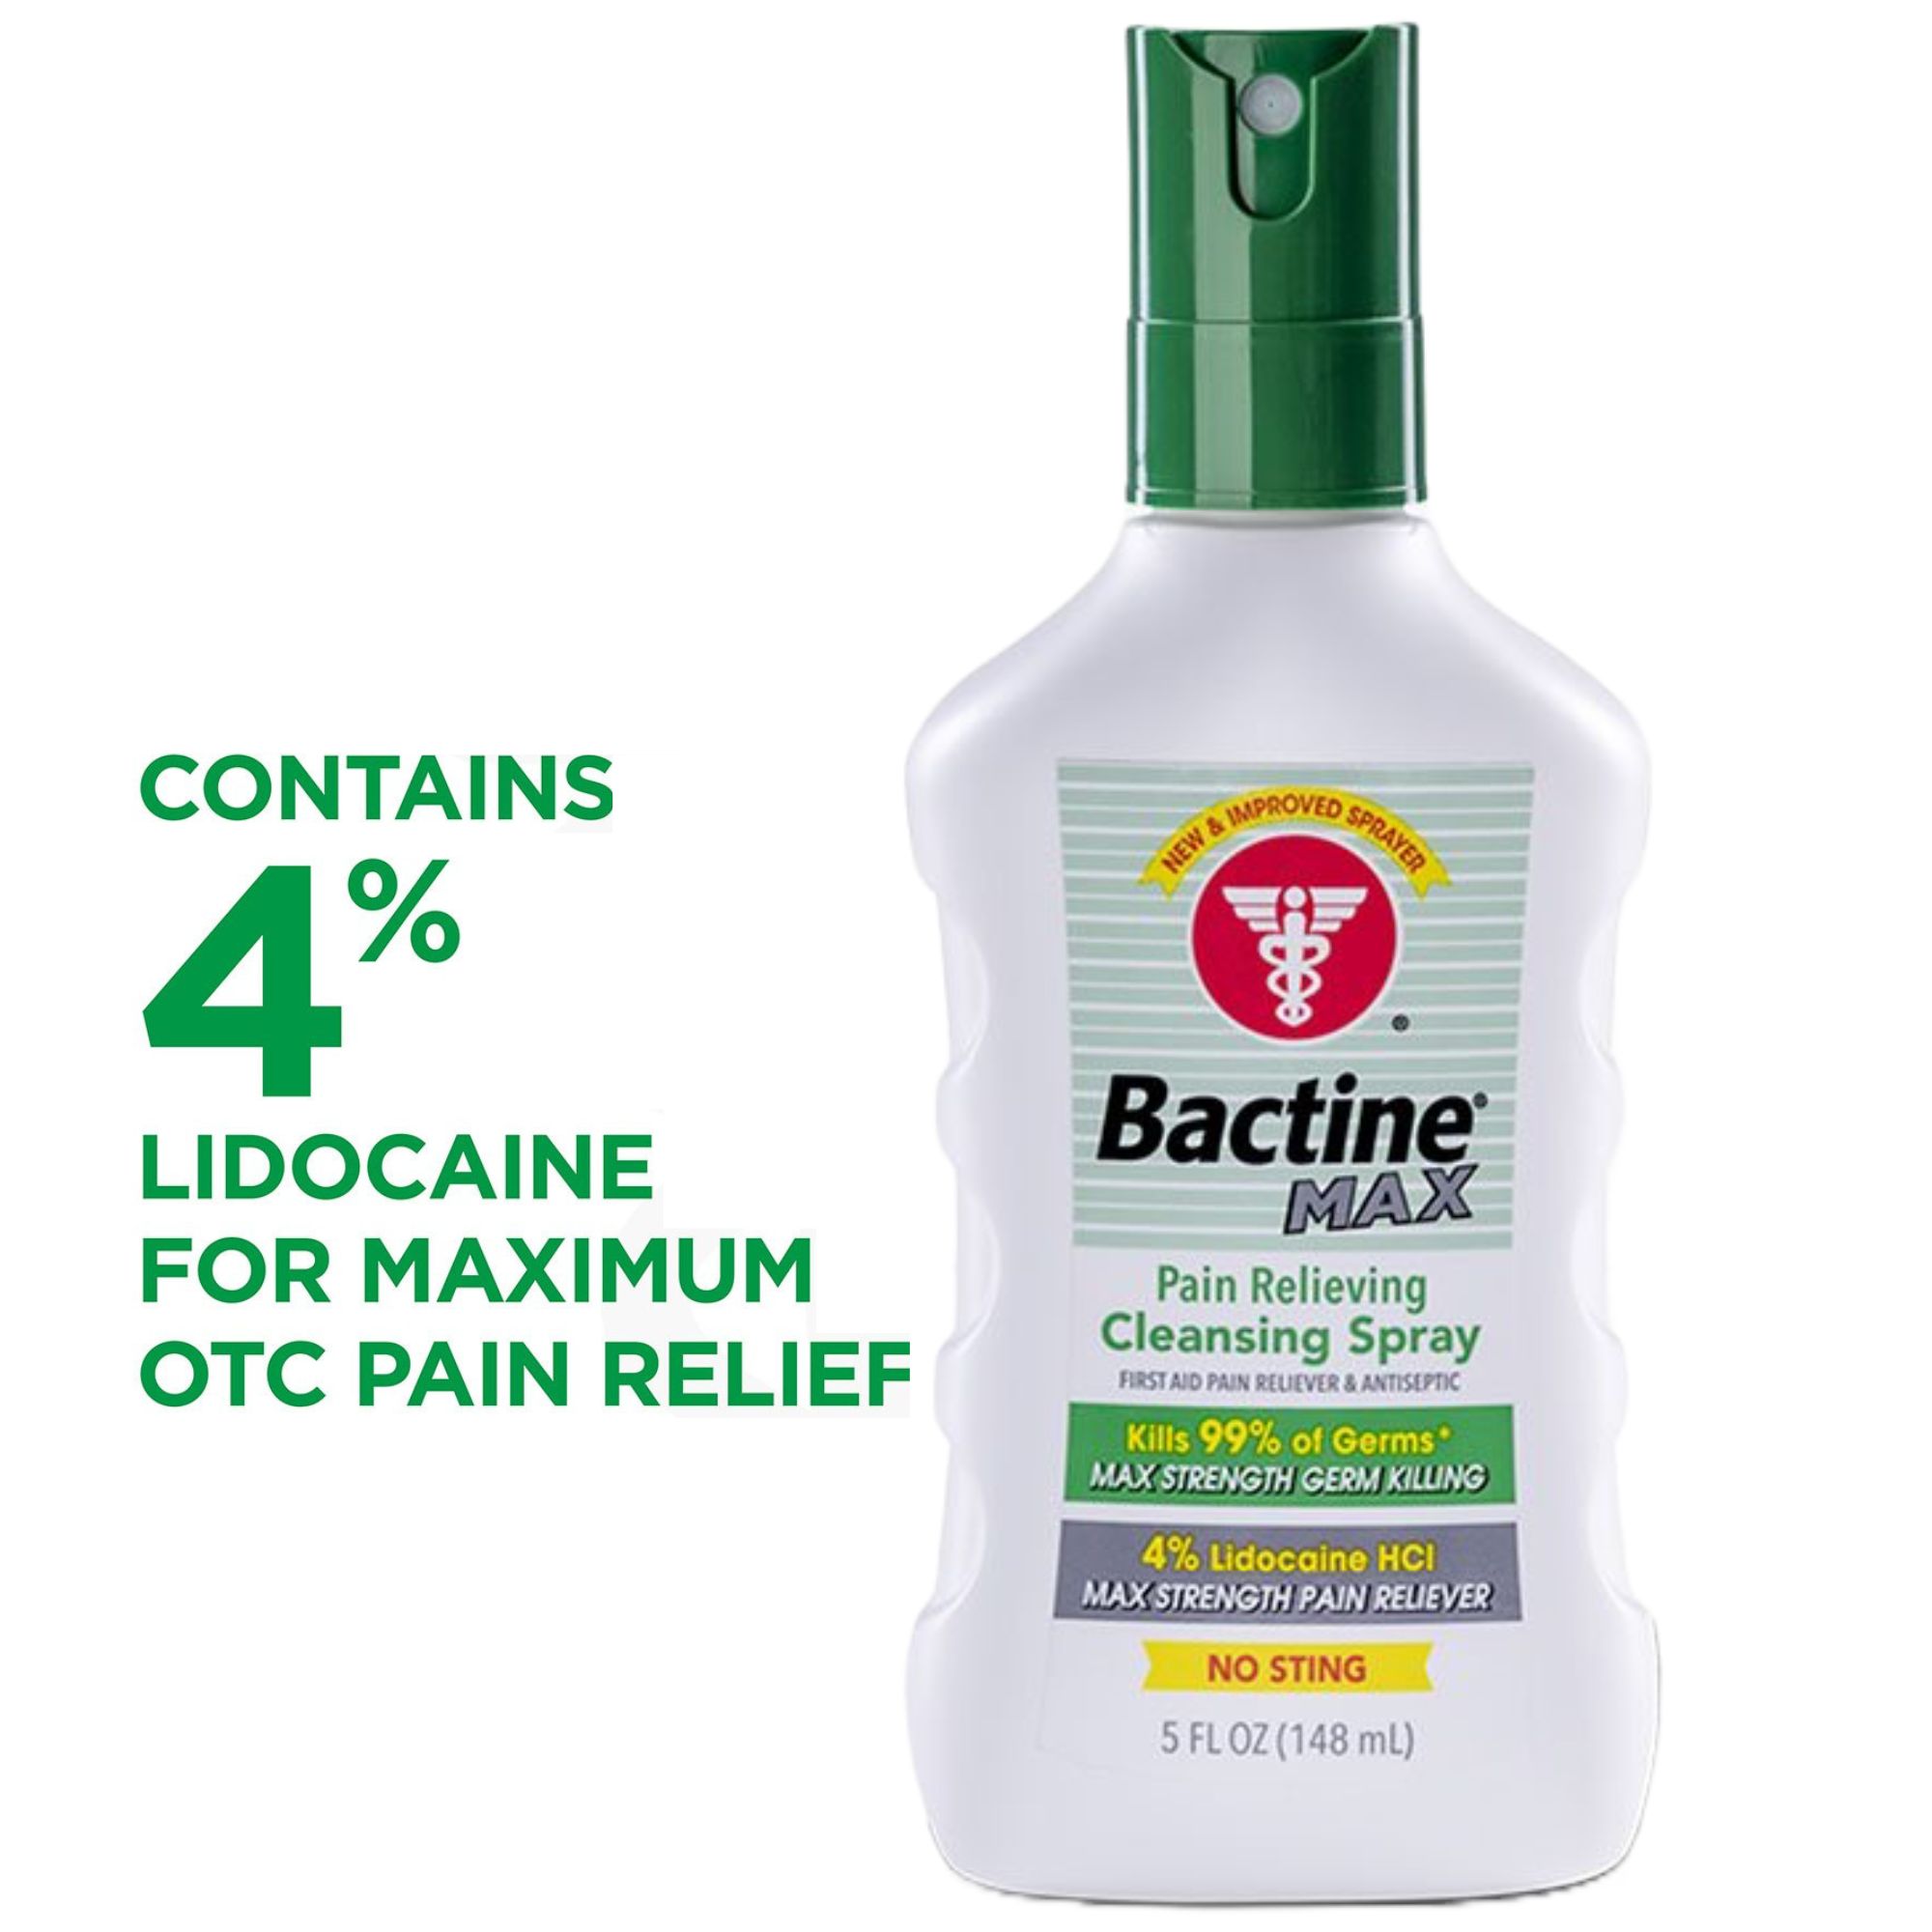 Steelenskin  BACTINE MAX PAIN RELIEVING CLEANSING SPRAY  Facebook